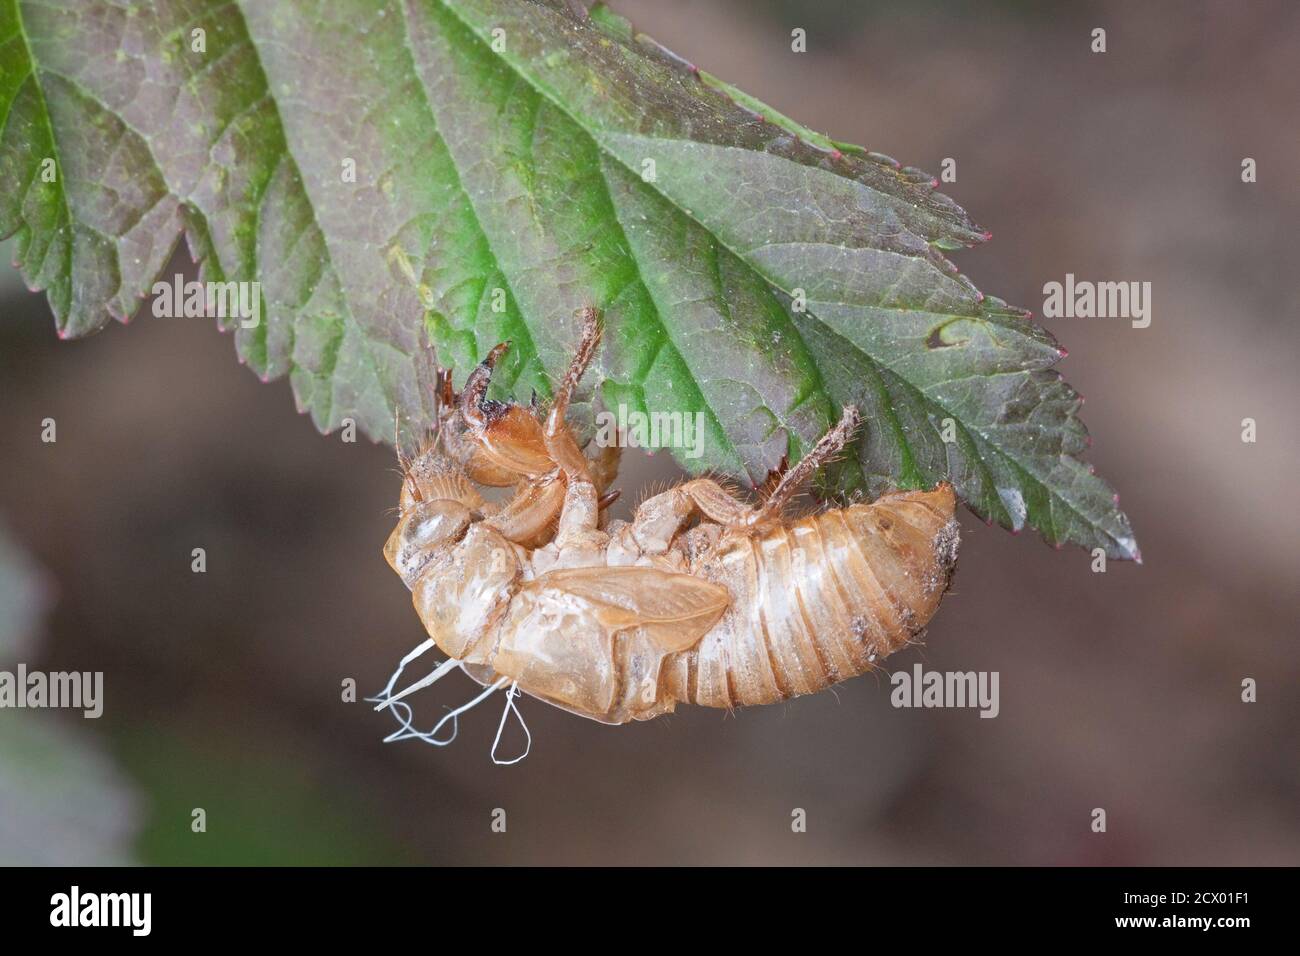 All that remains is the empty shell of a cicada. The shell still hangs  precariously from a leaf. Stock Photo